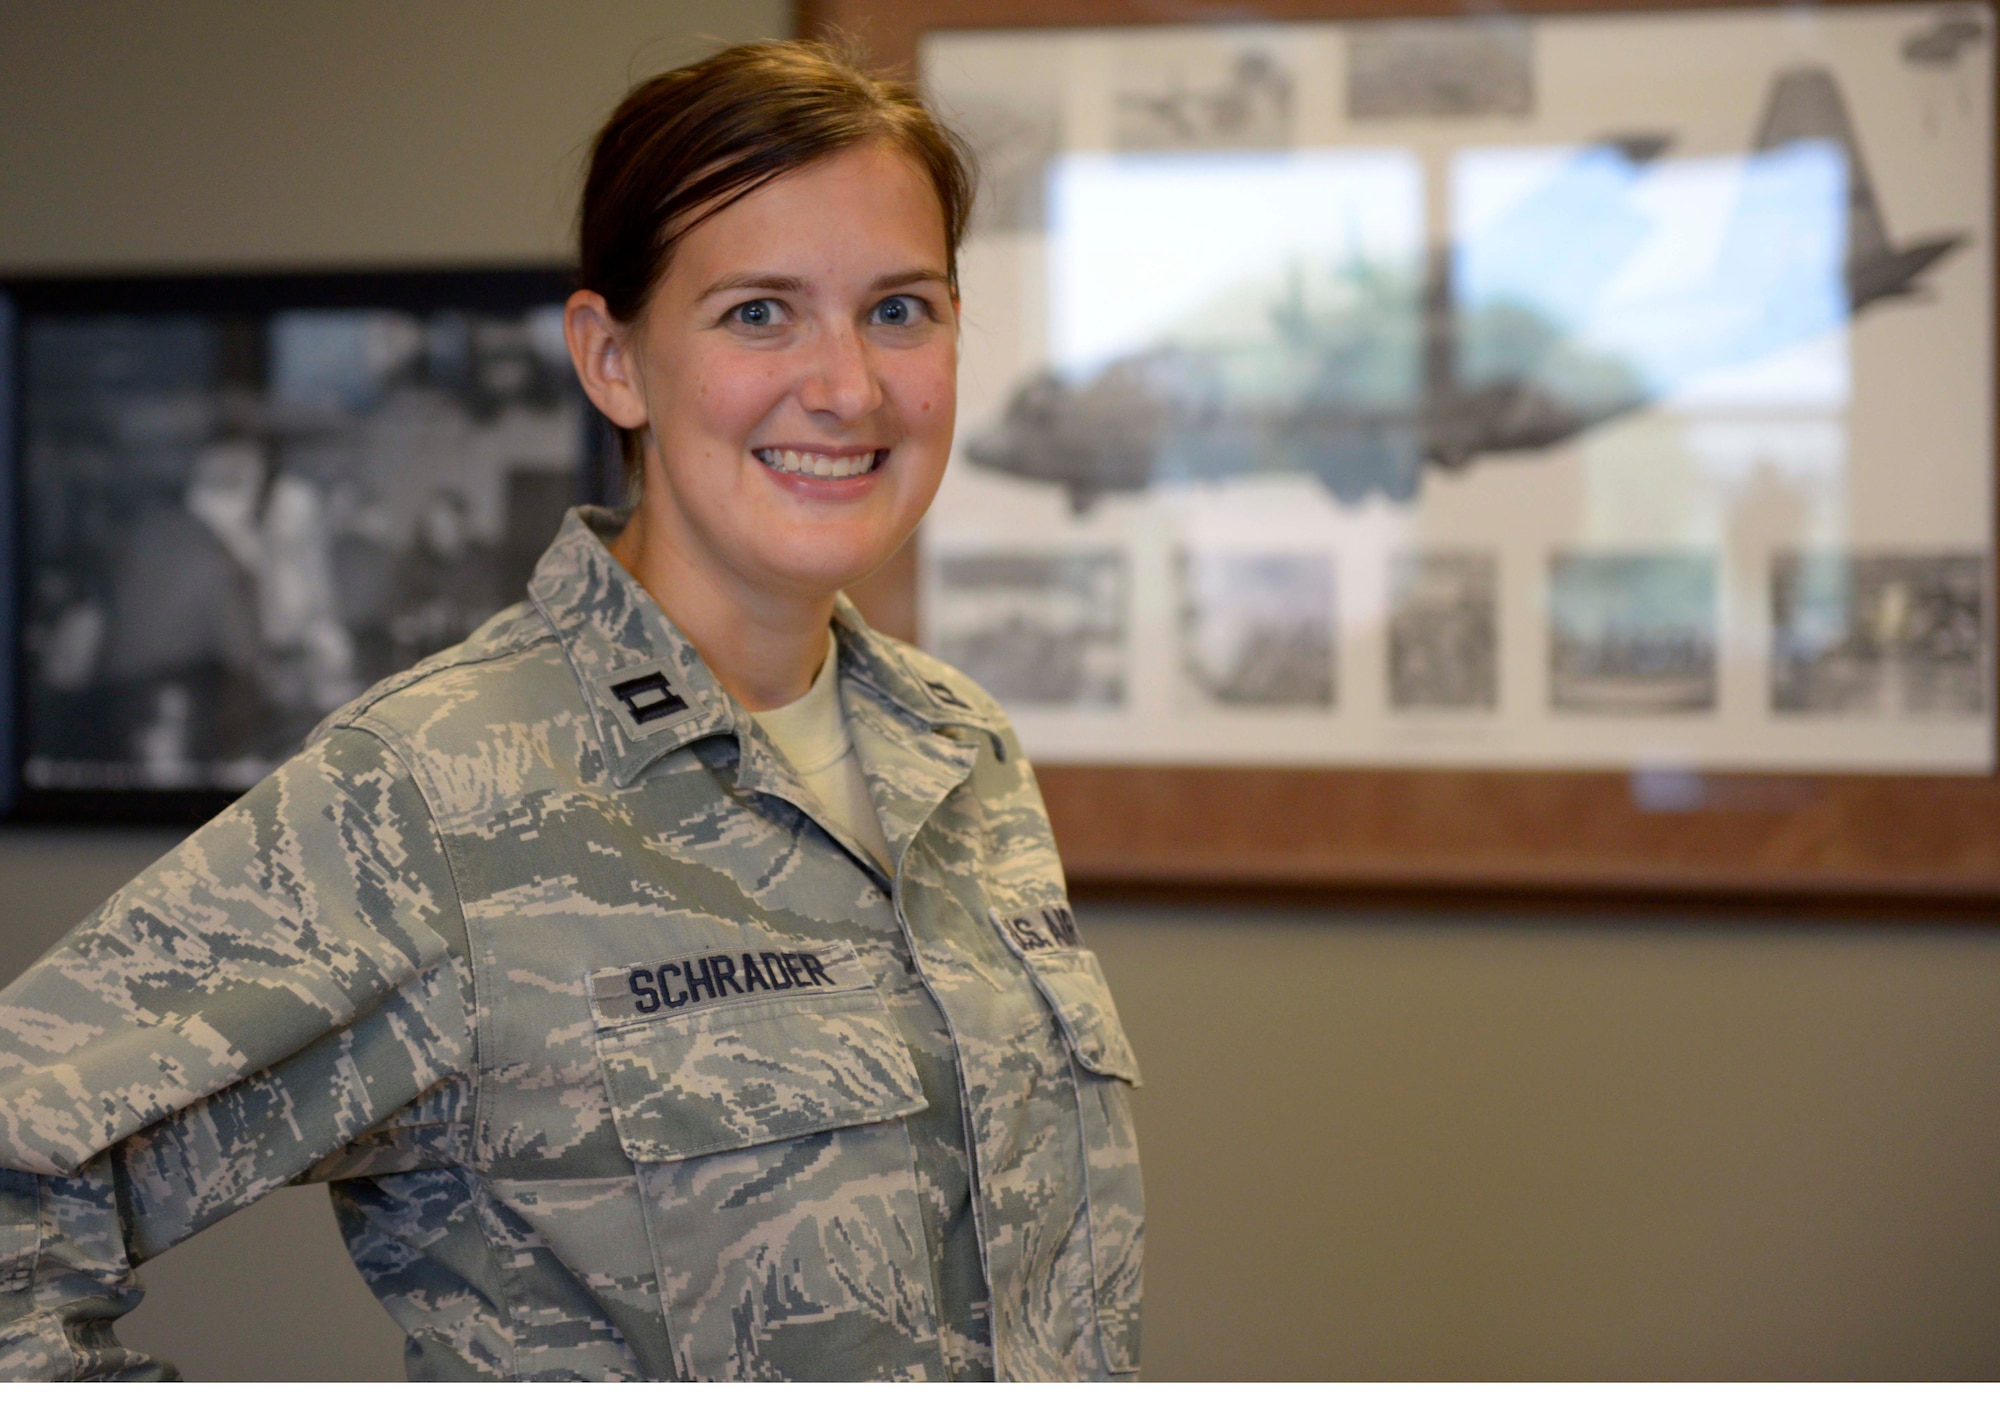 Capt. Christine Schrader at the 934th Airlift Wing (Air Force Photo/Paul Zadach)